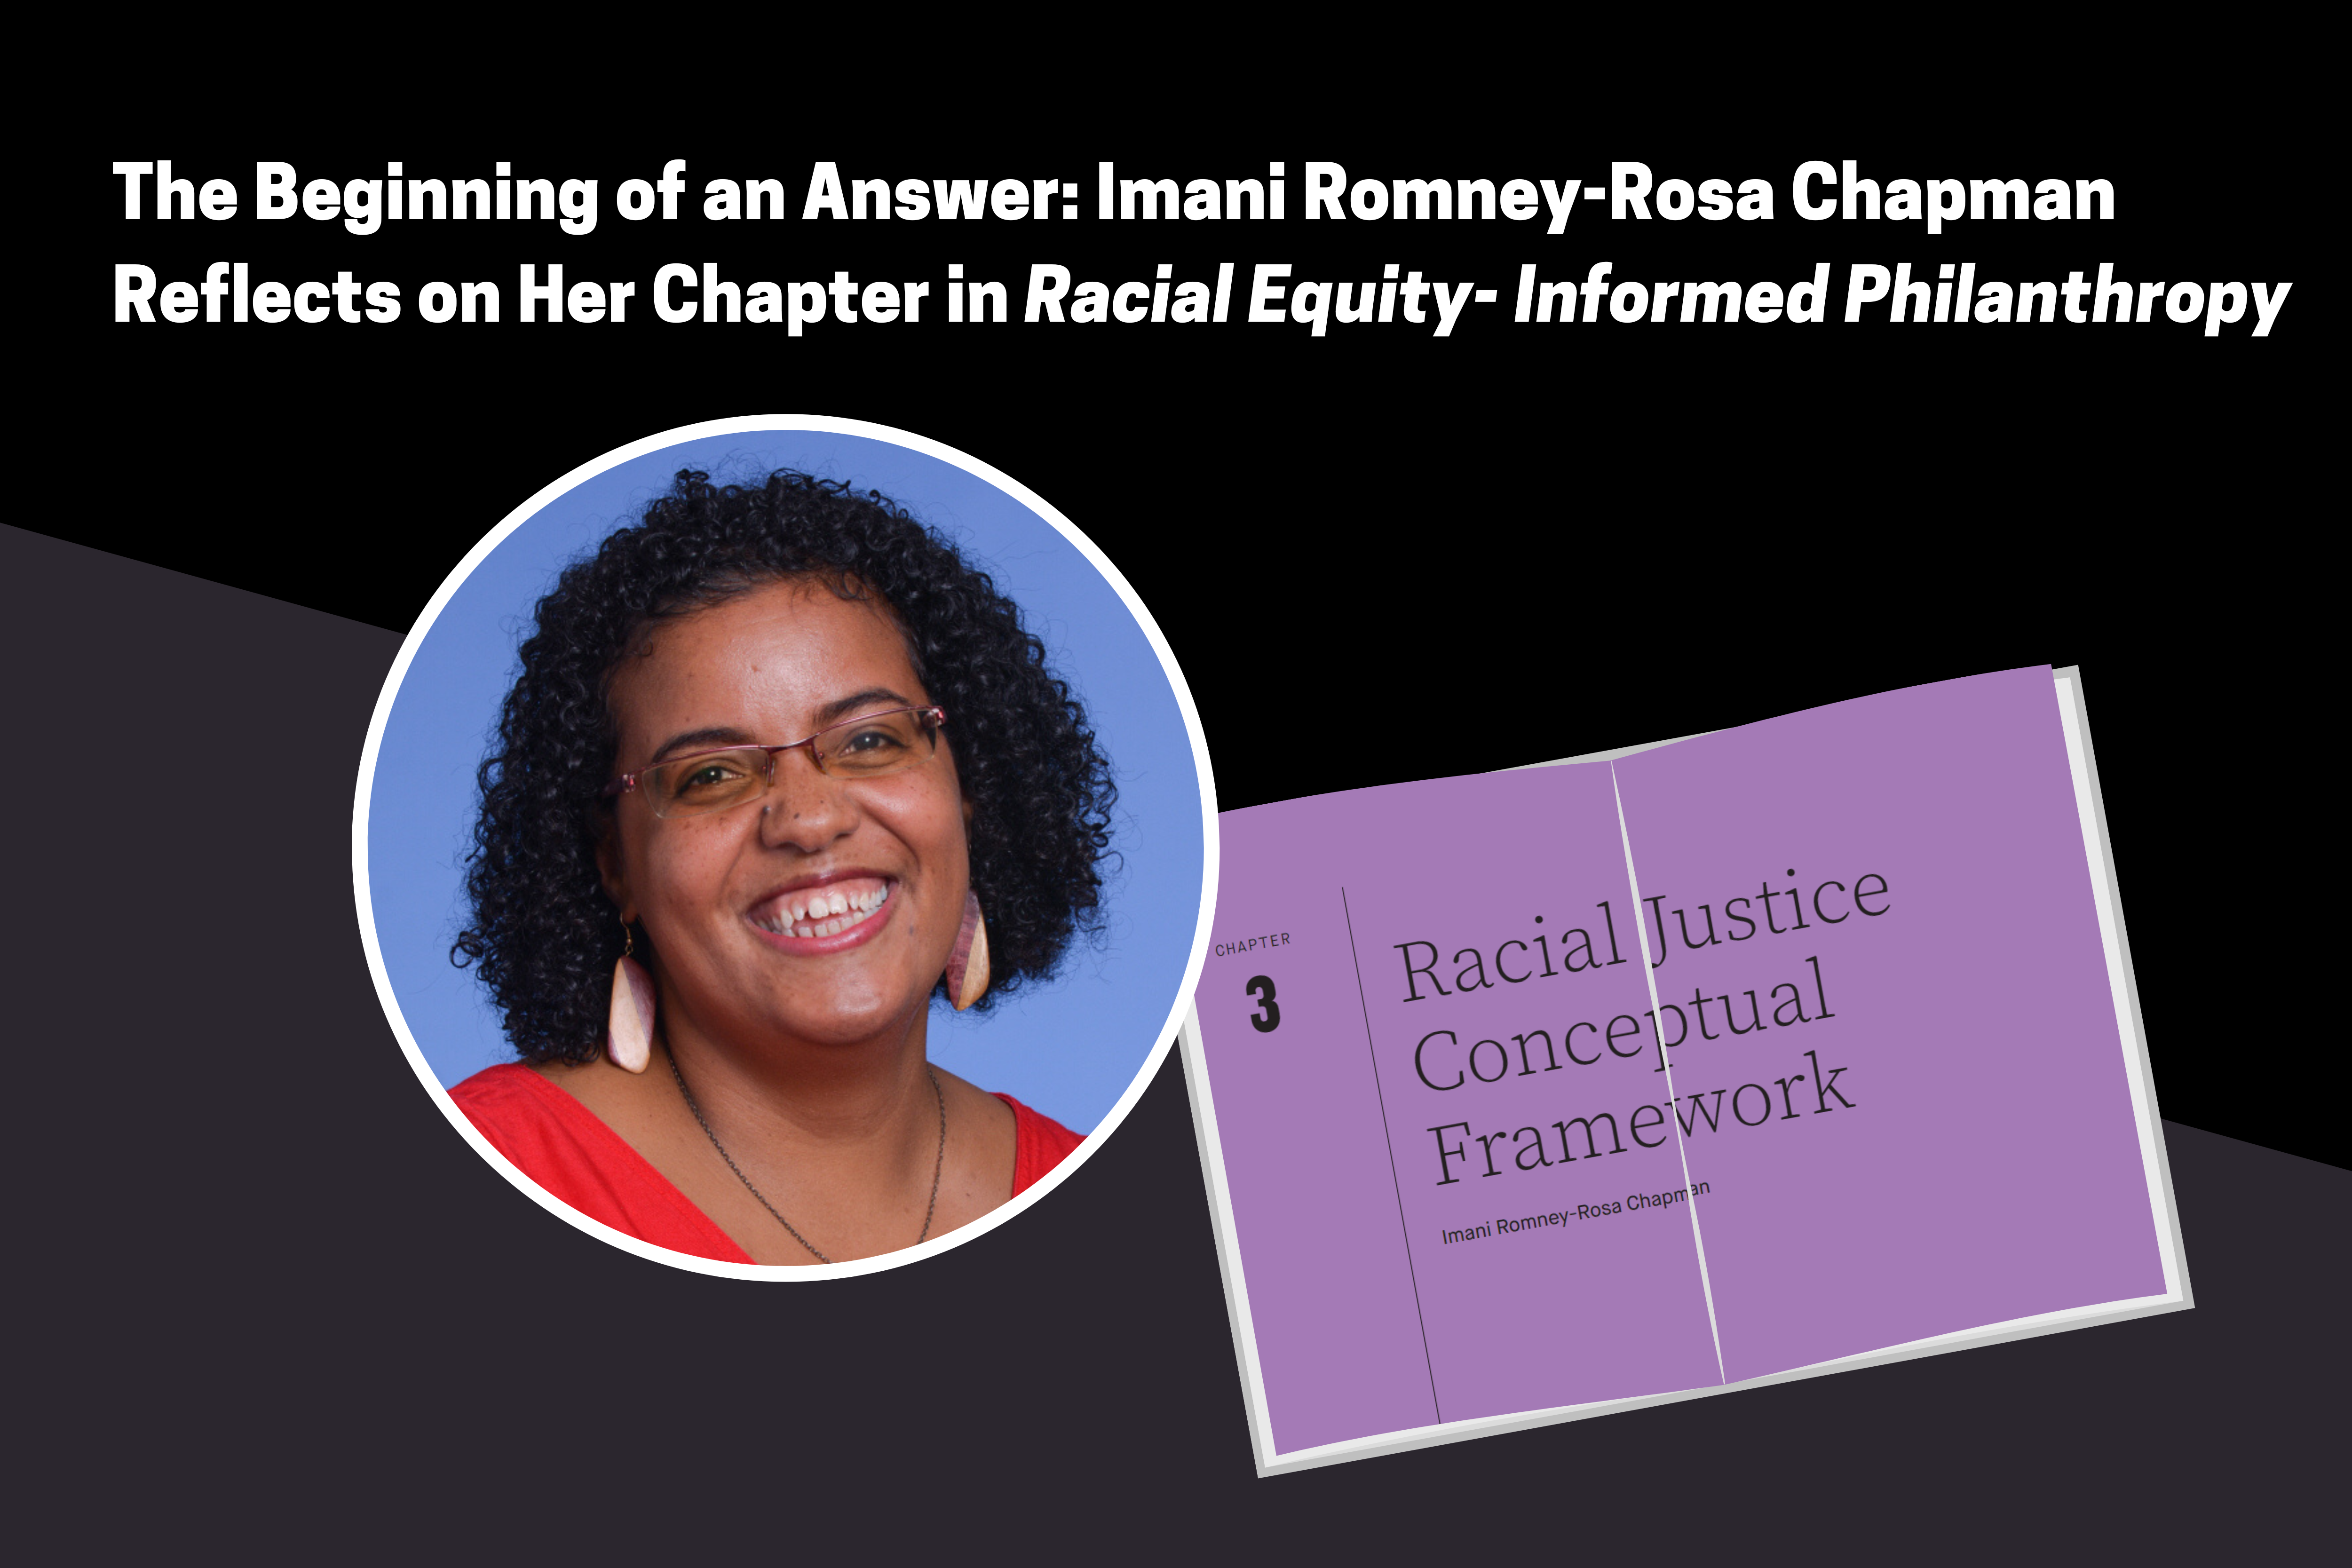 The Beginning of an Answer; image shows a photo of Imani Romney-Rosa Chapman and the title of her chapter, "Racial Justice Conceptual Framework"